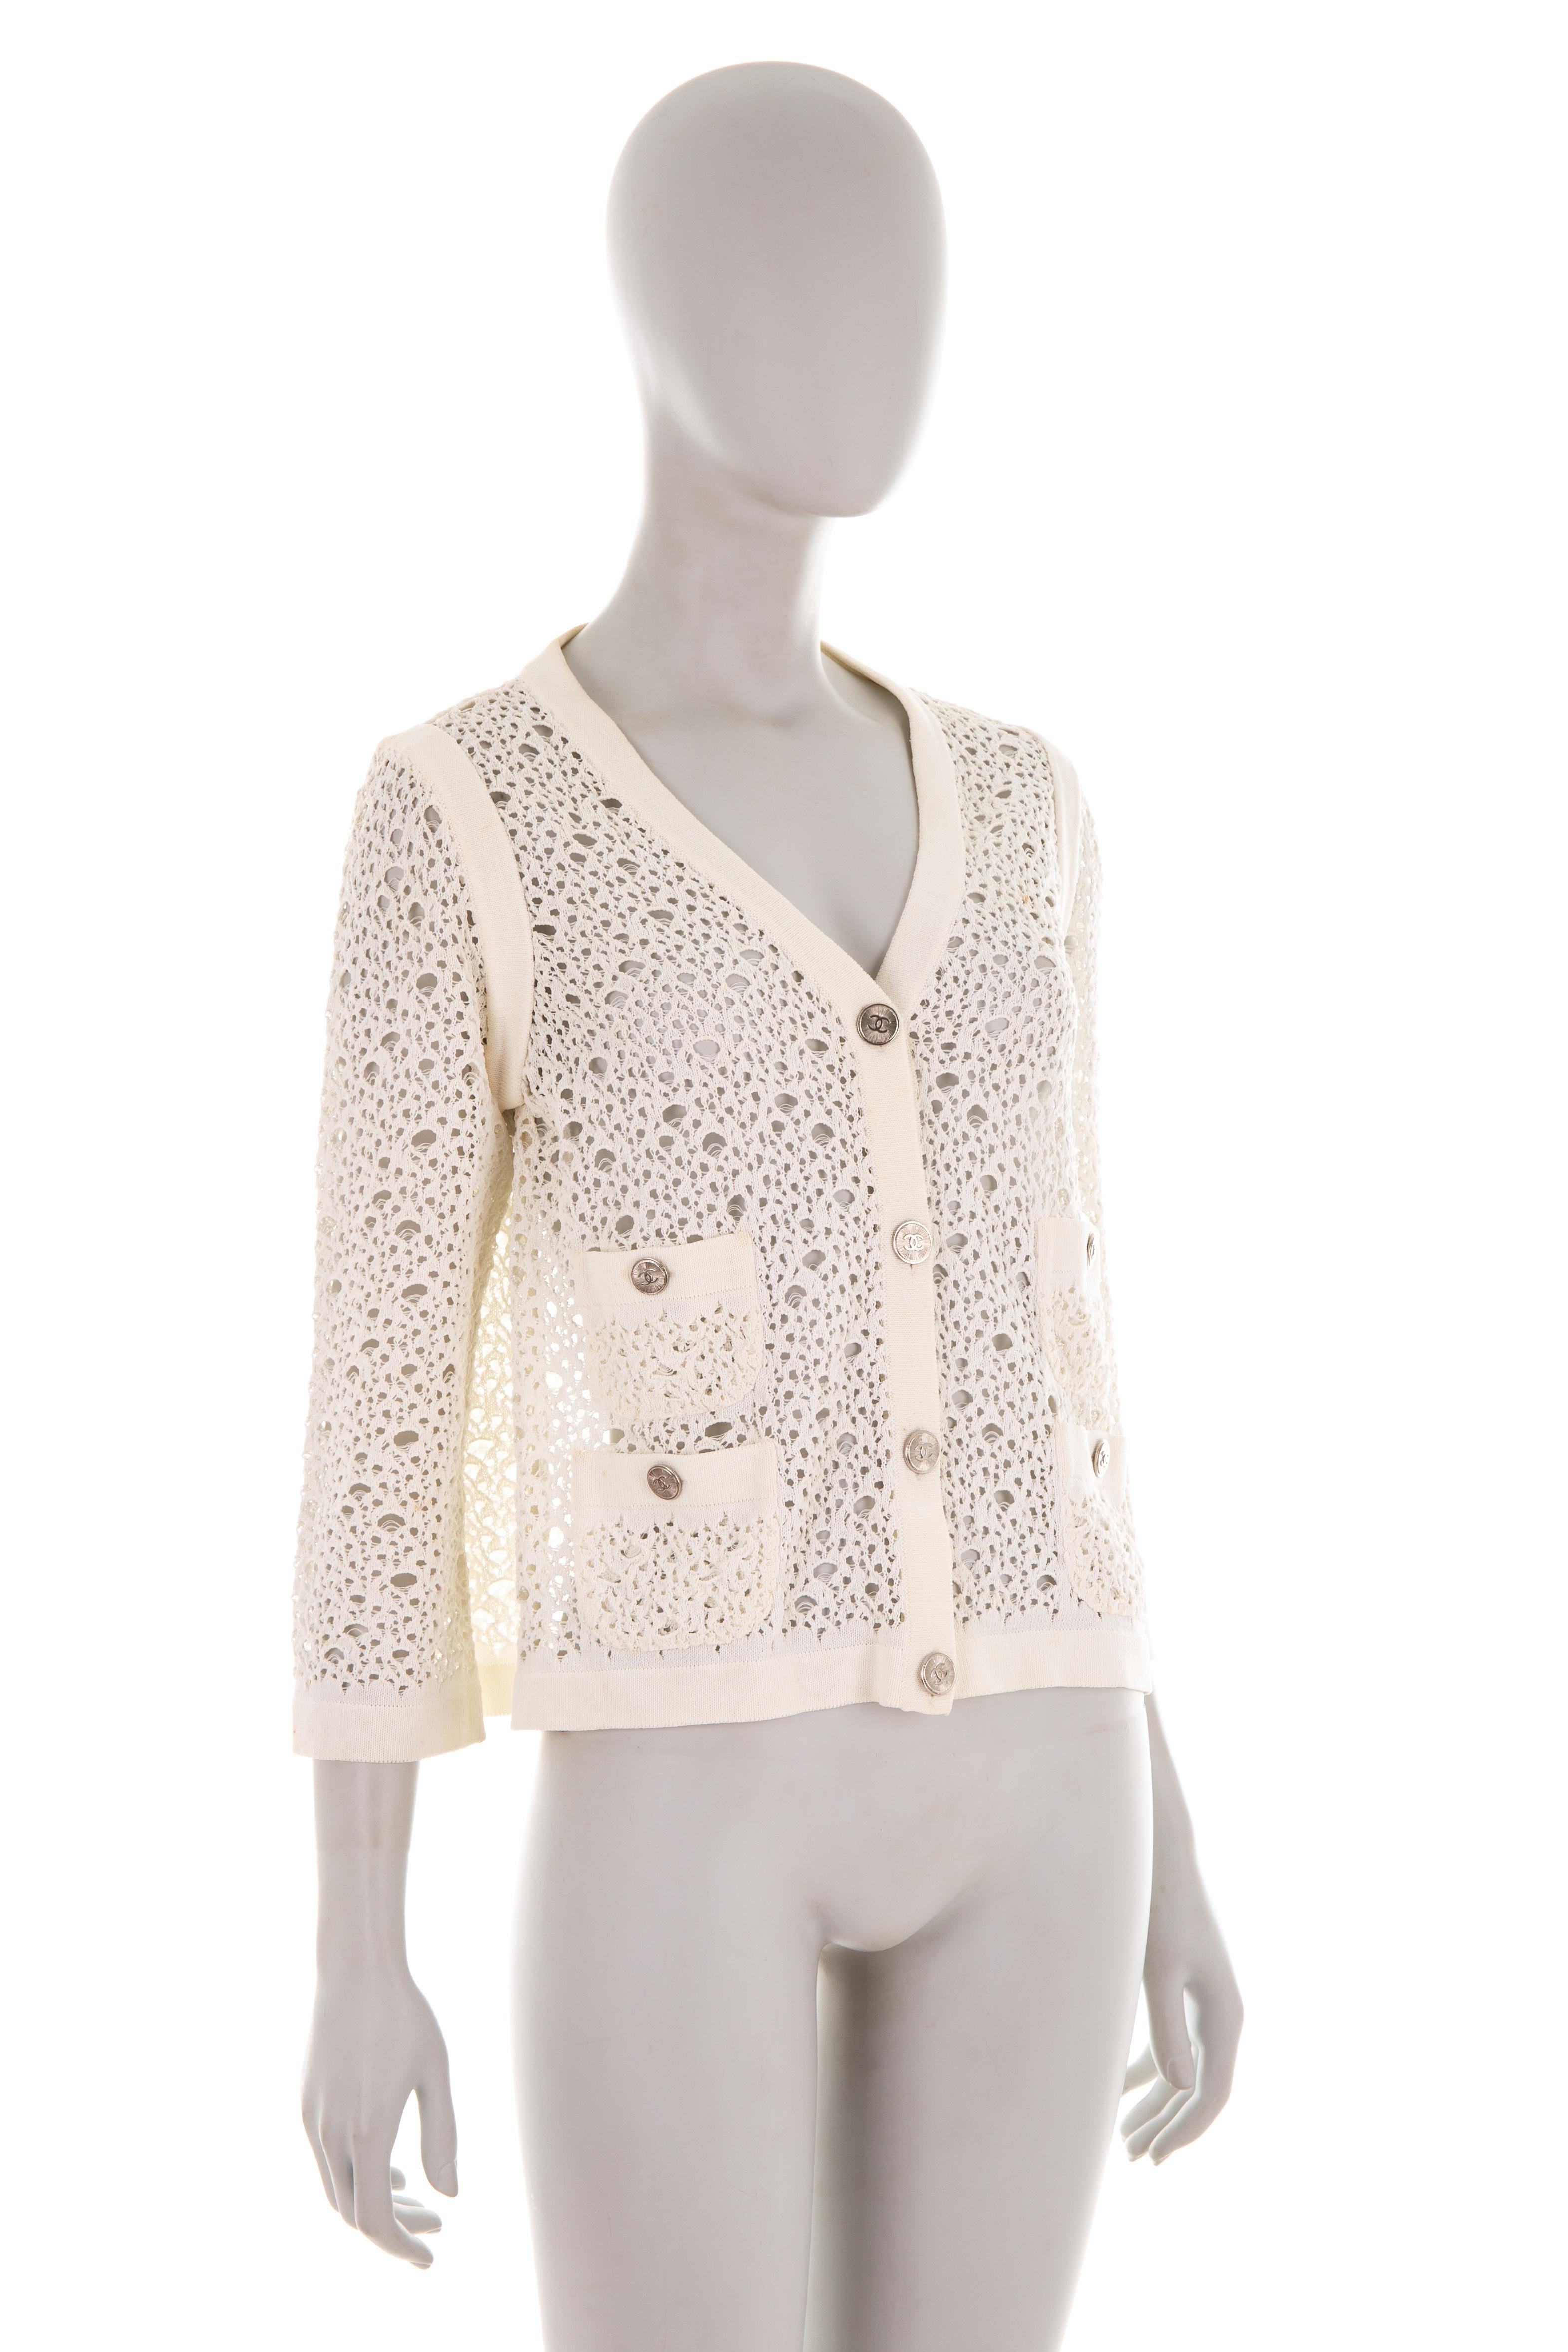 Chanel F/W 2005 off-white distressed cardigan In Good Condition For Sale In Rome, IT